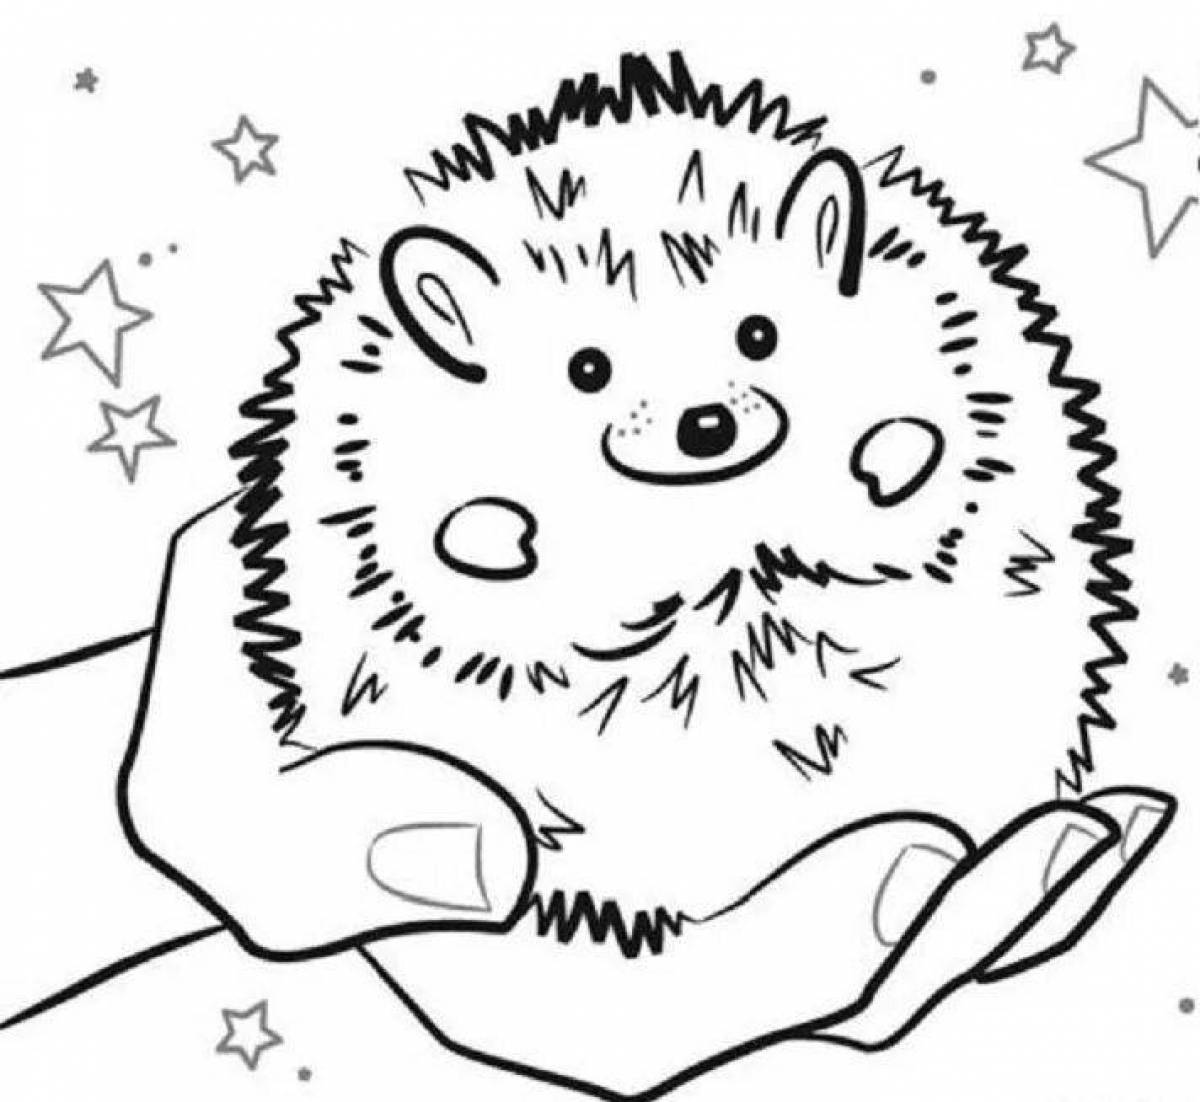 Adorable and cute hedgehog coloring book